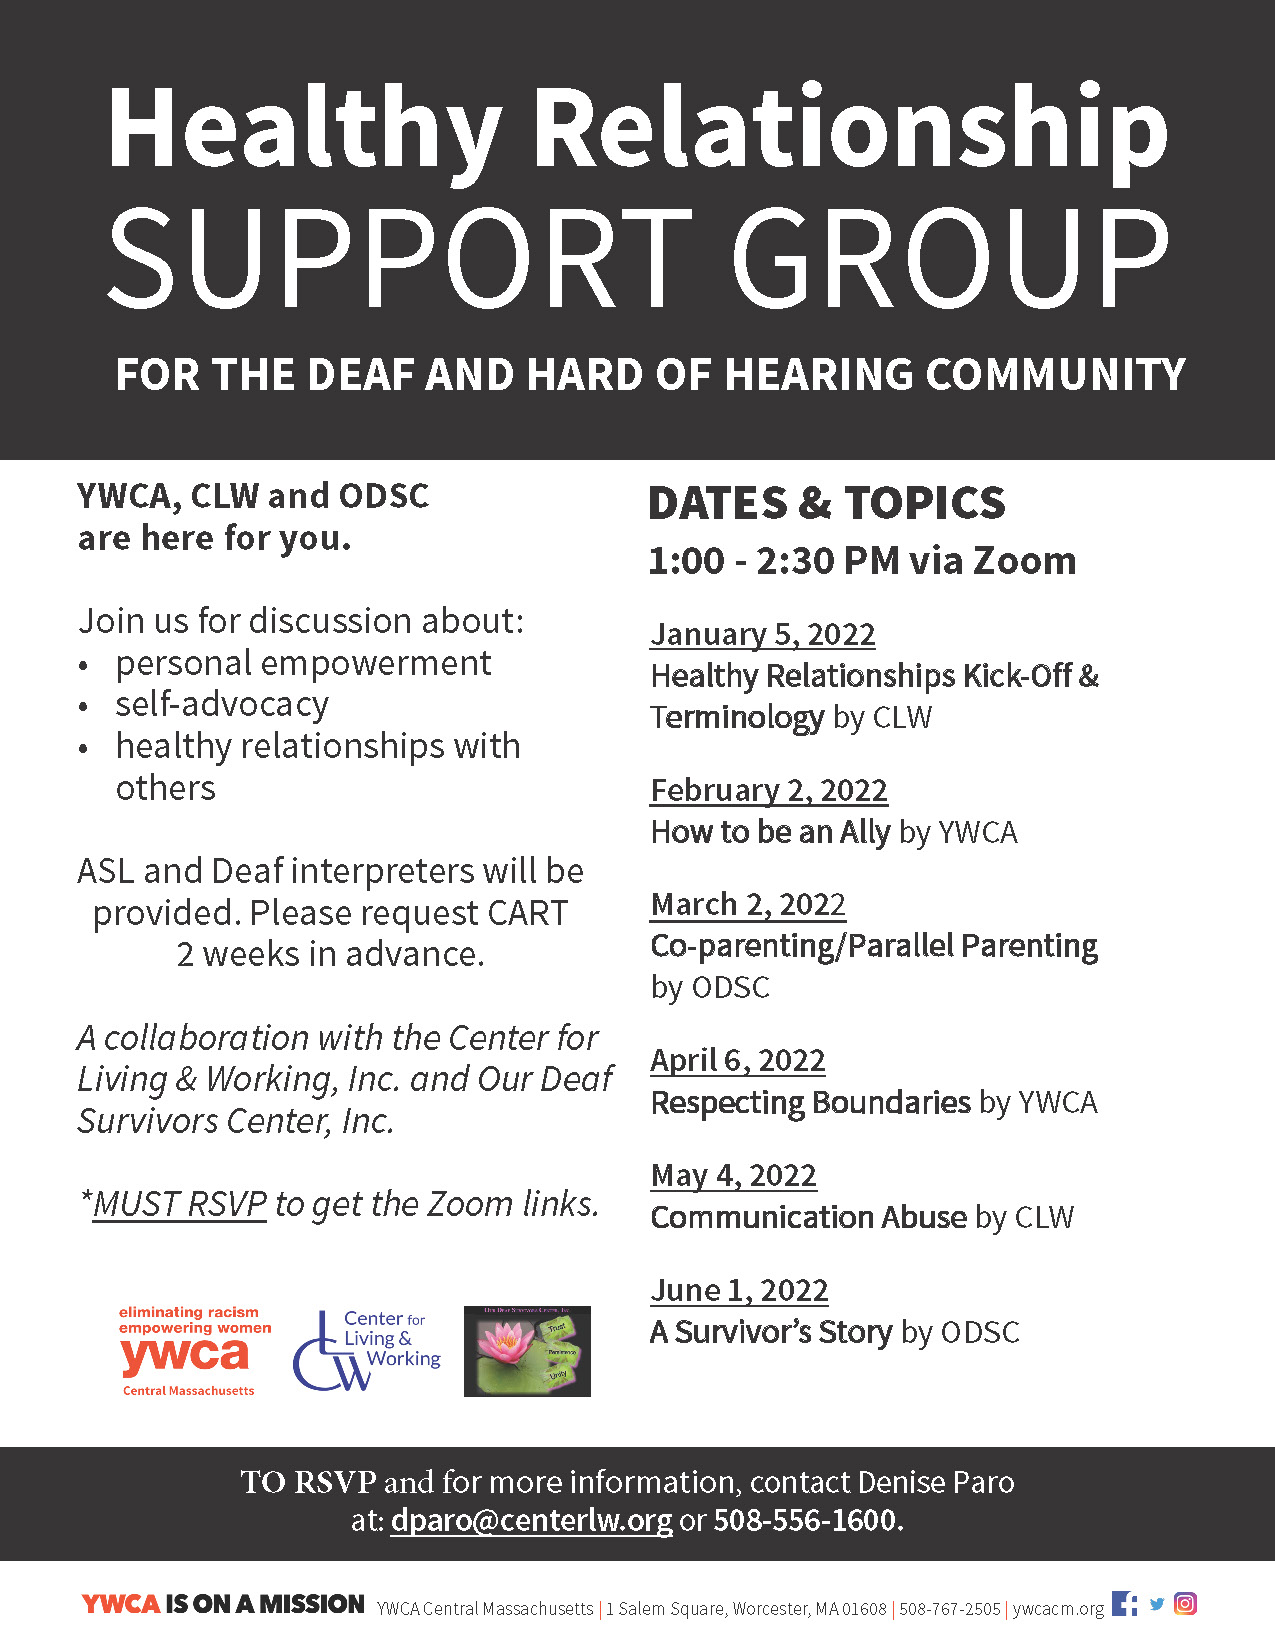 Healthy Relationship Support Group for Deaf and Hard of Hearing Flyer and Information